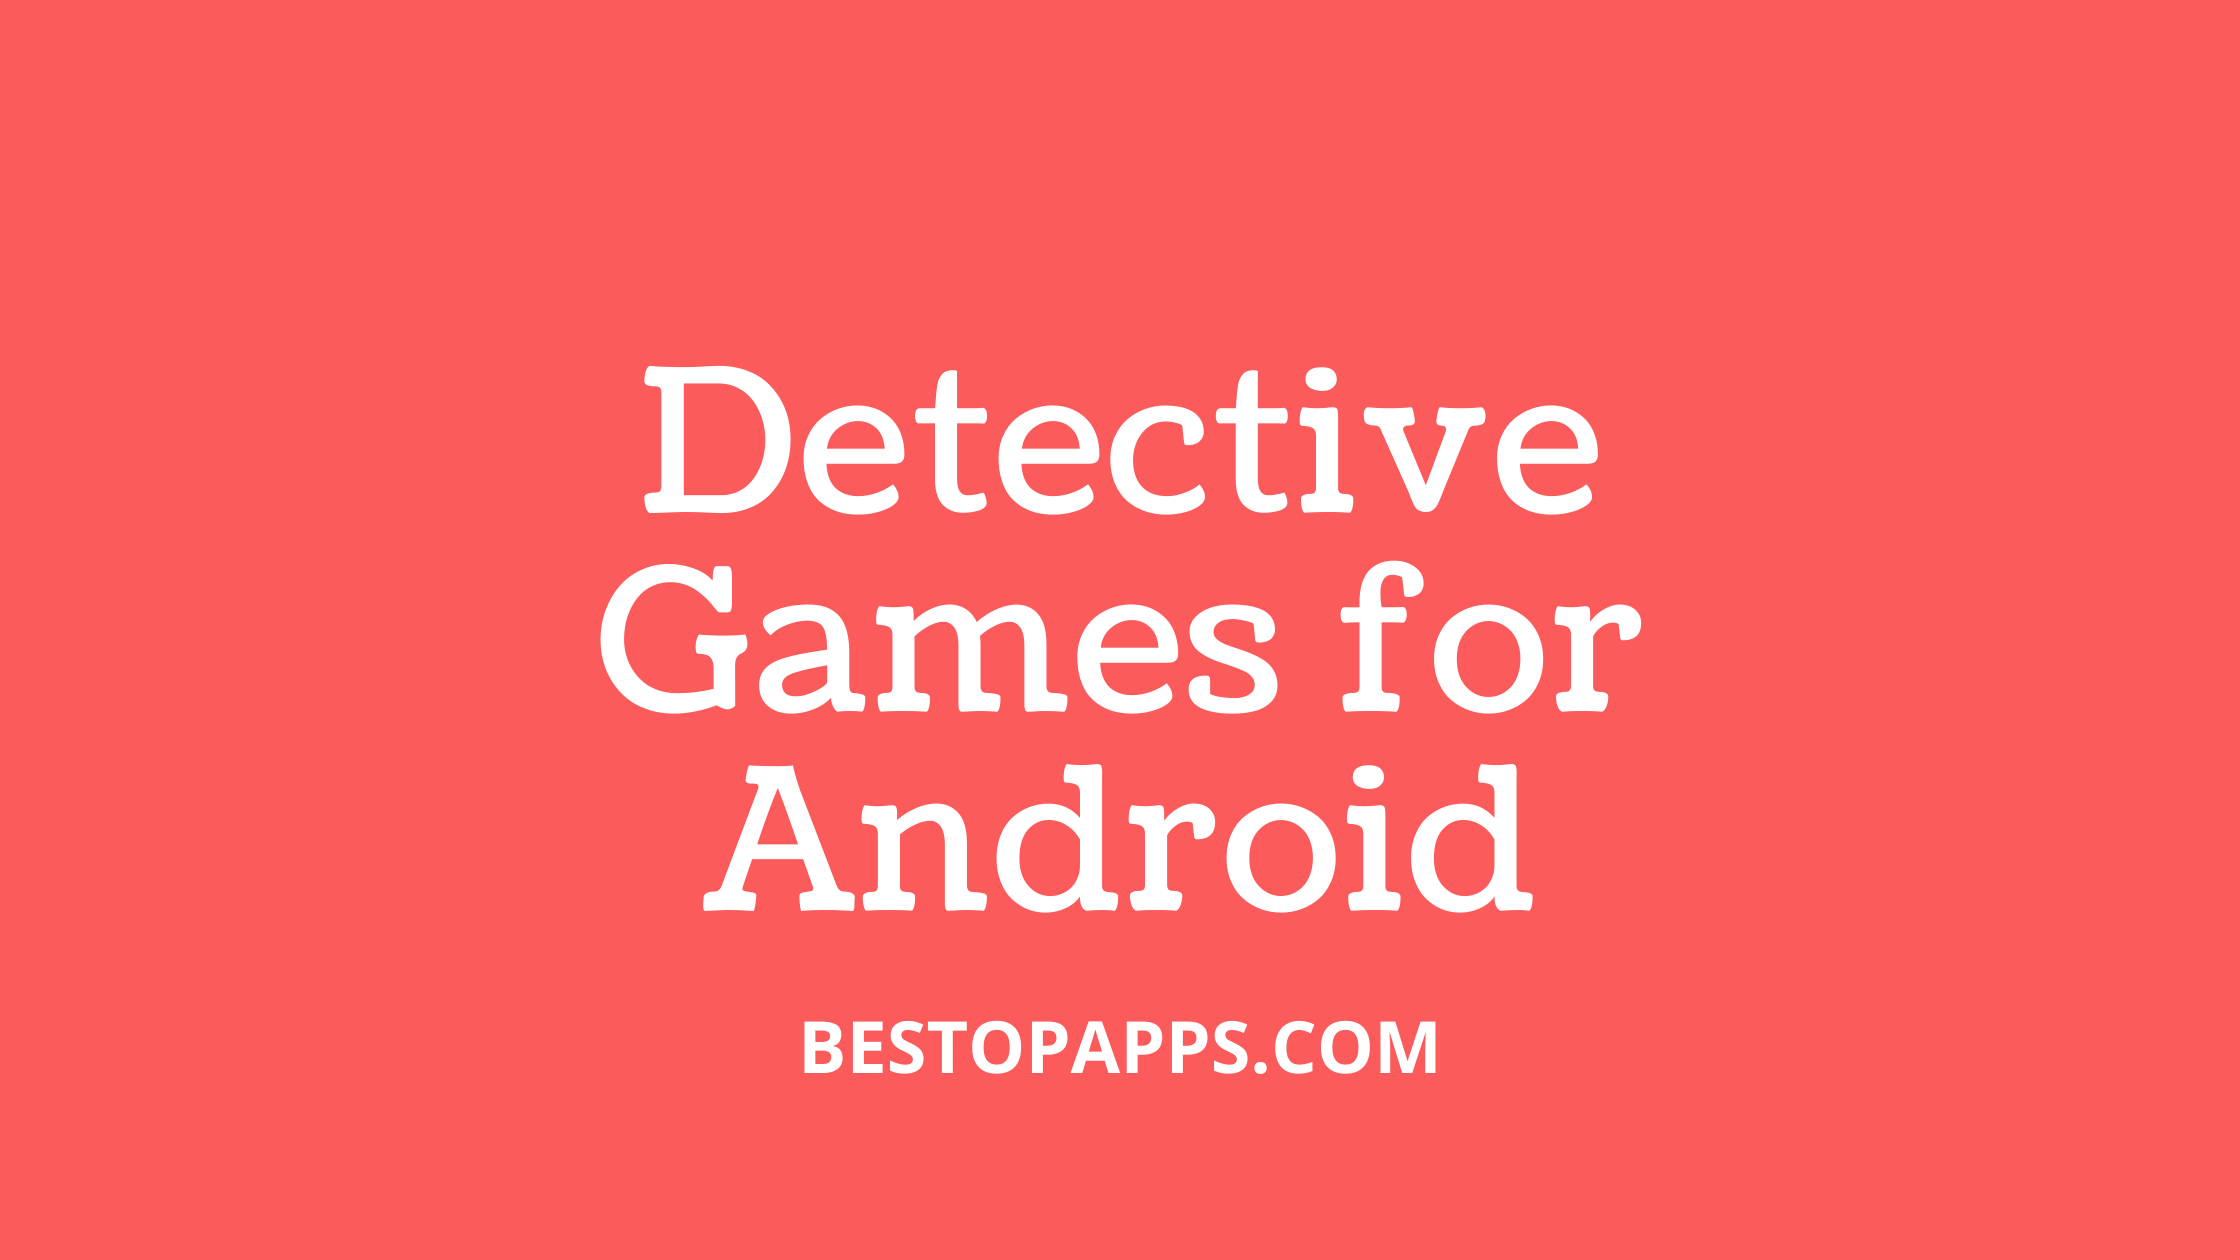 Detective Games for Android